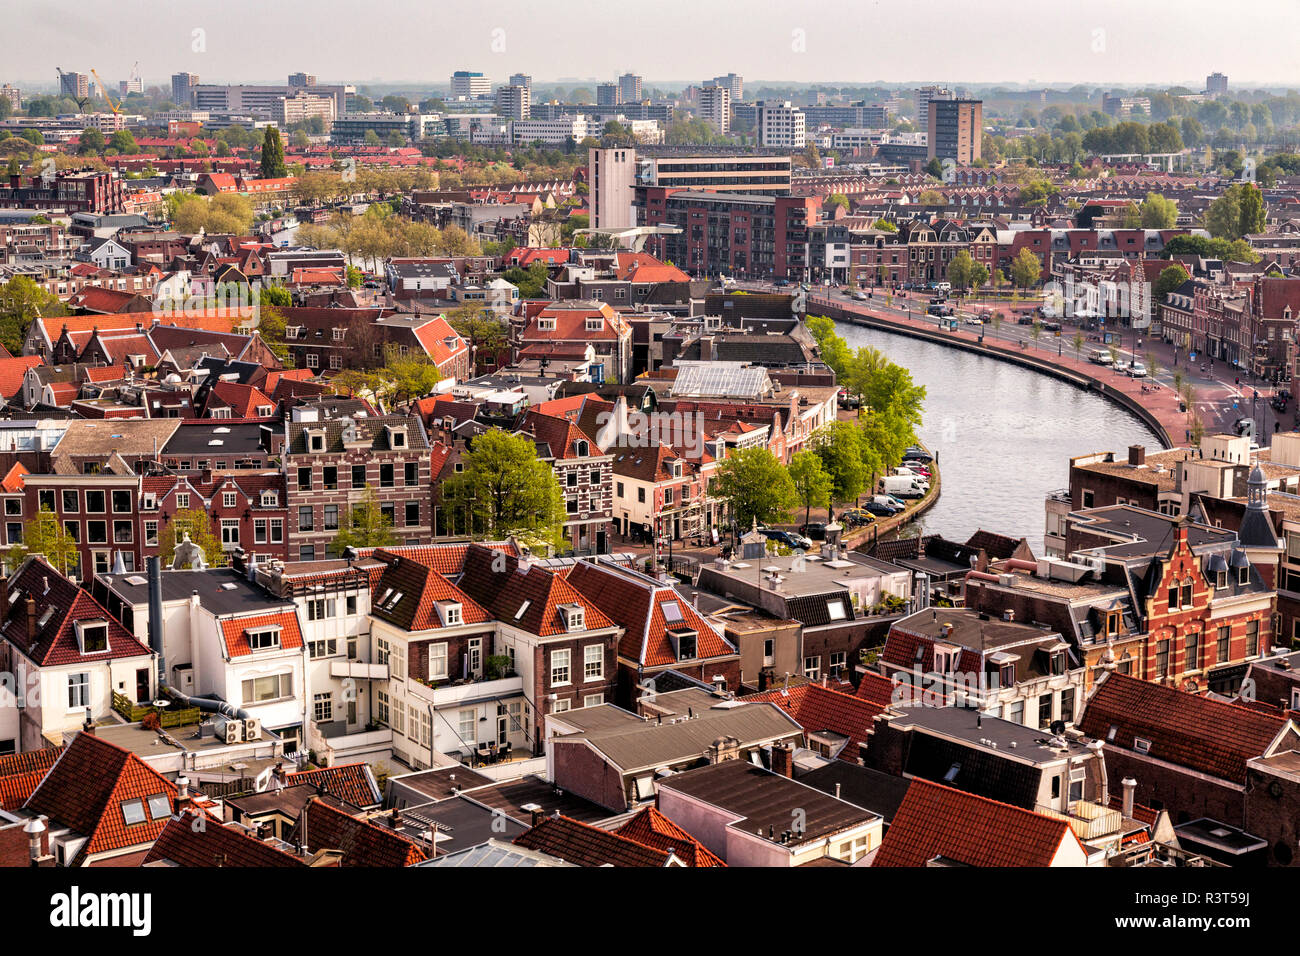 Elevated view of Haarlem, Netherlands. Stock Photo